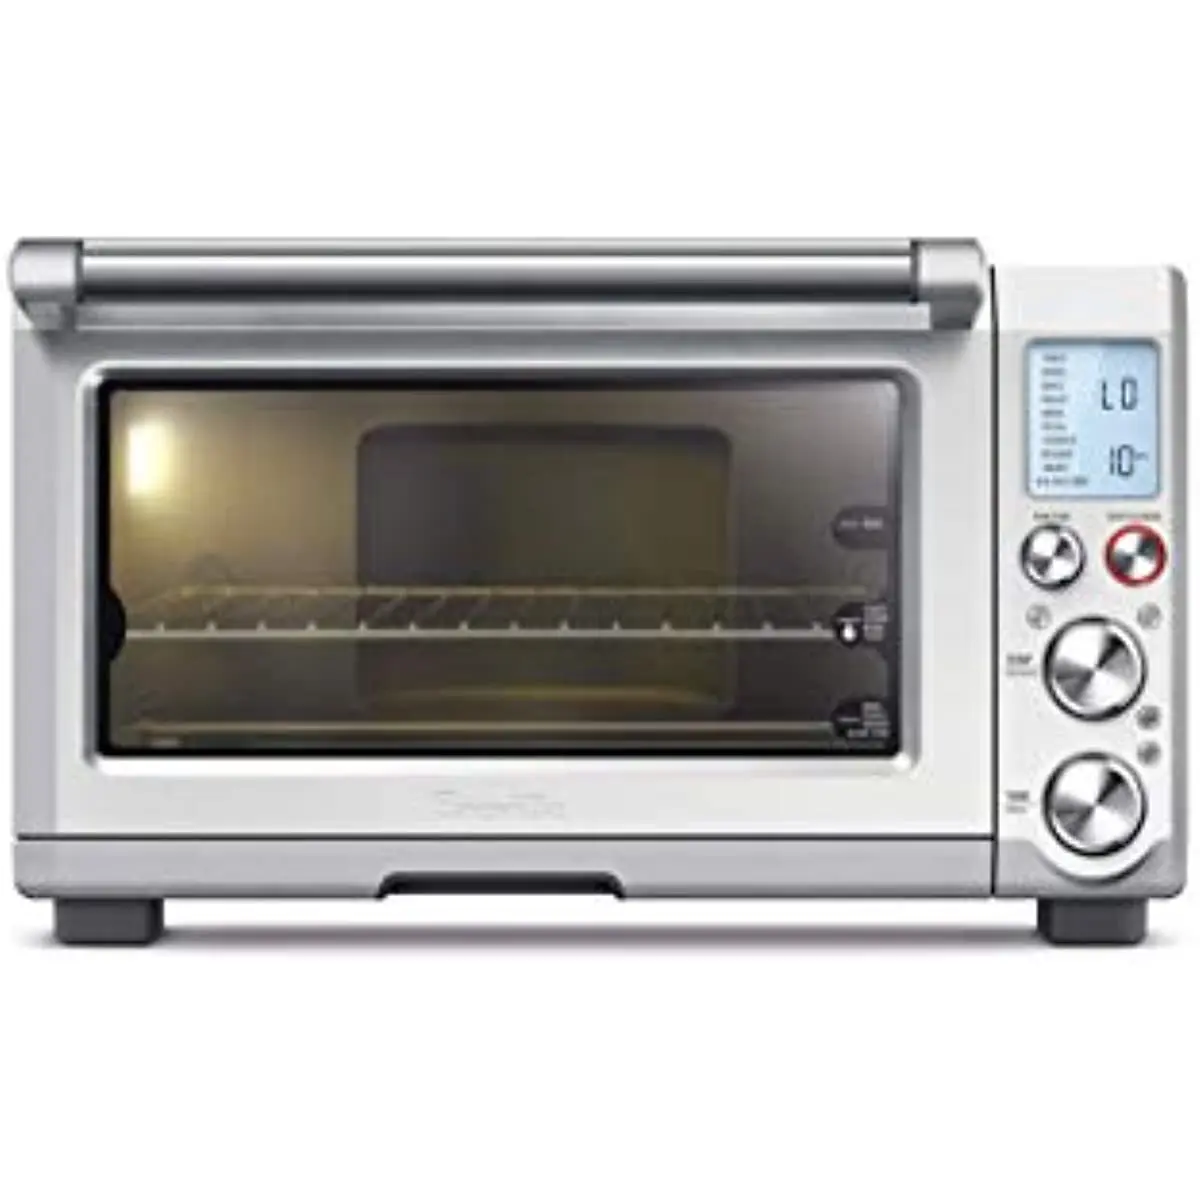 

Breville Smart Oven Pro Toaster Oven, Brushed Stainless Steel, BOV845BSS